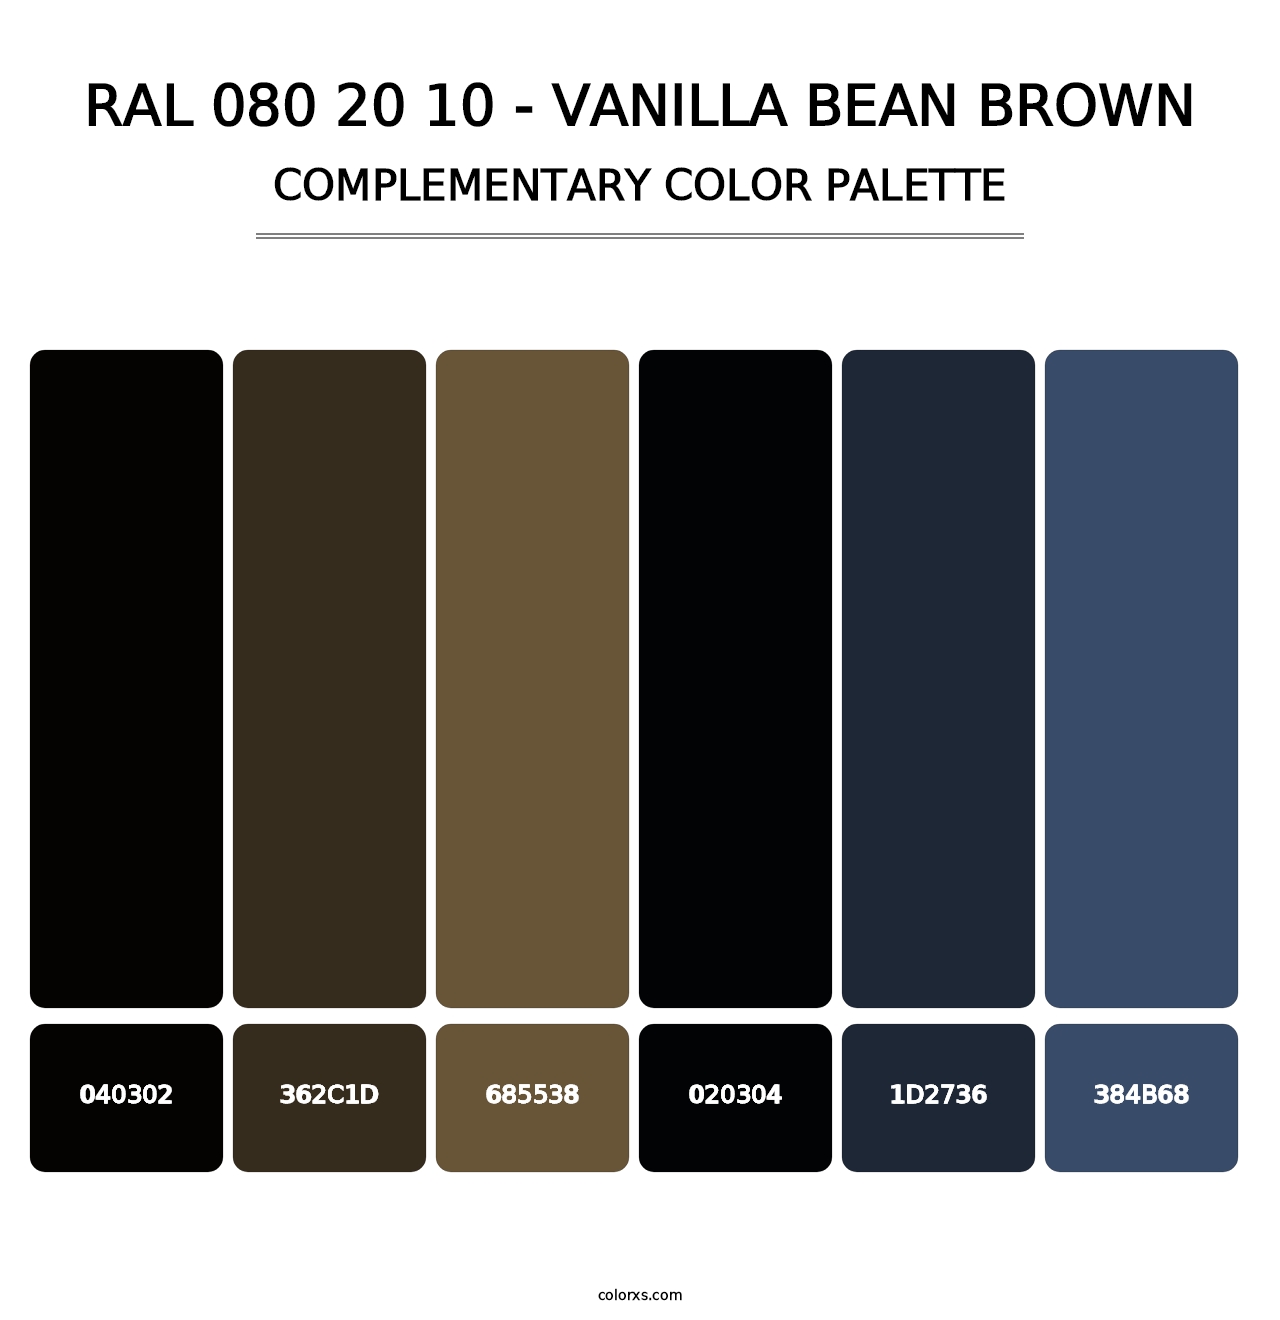 RAL 080 20 10 - Vanilla Bean Brown - Complementary Color Palette